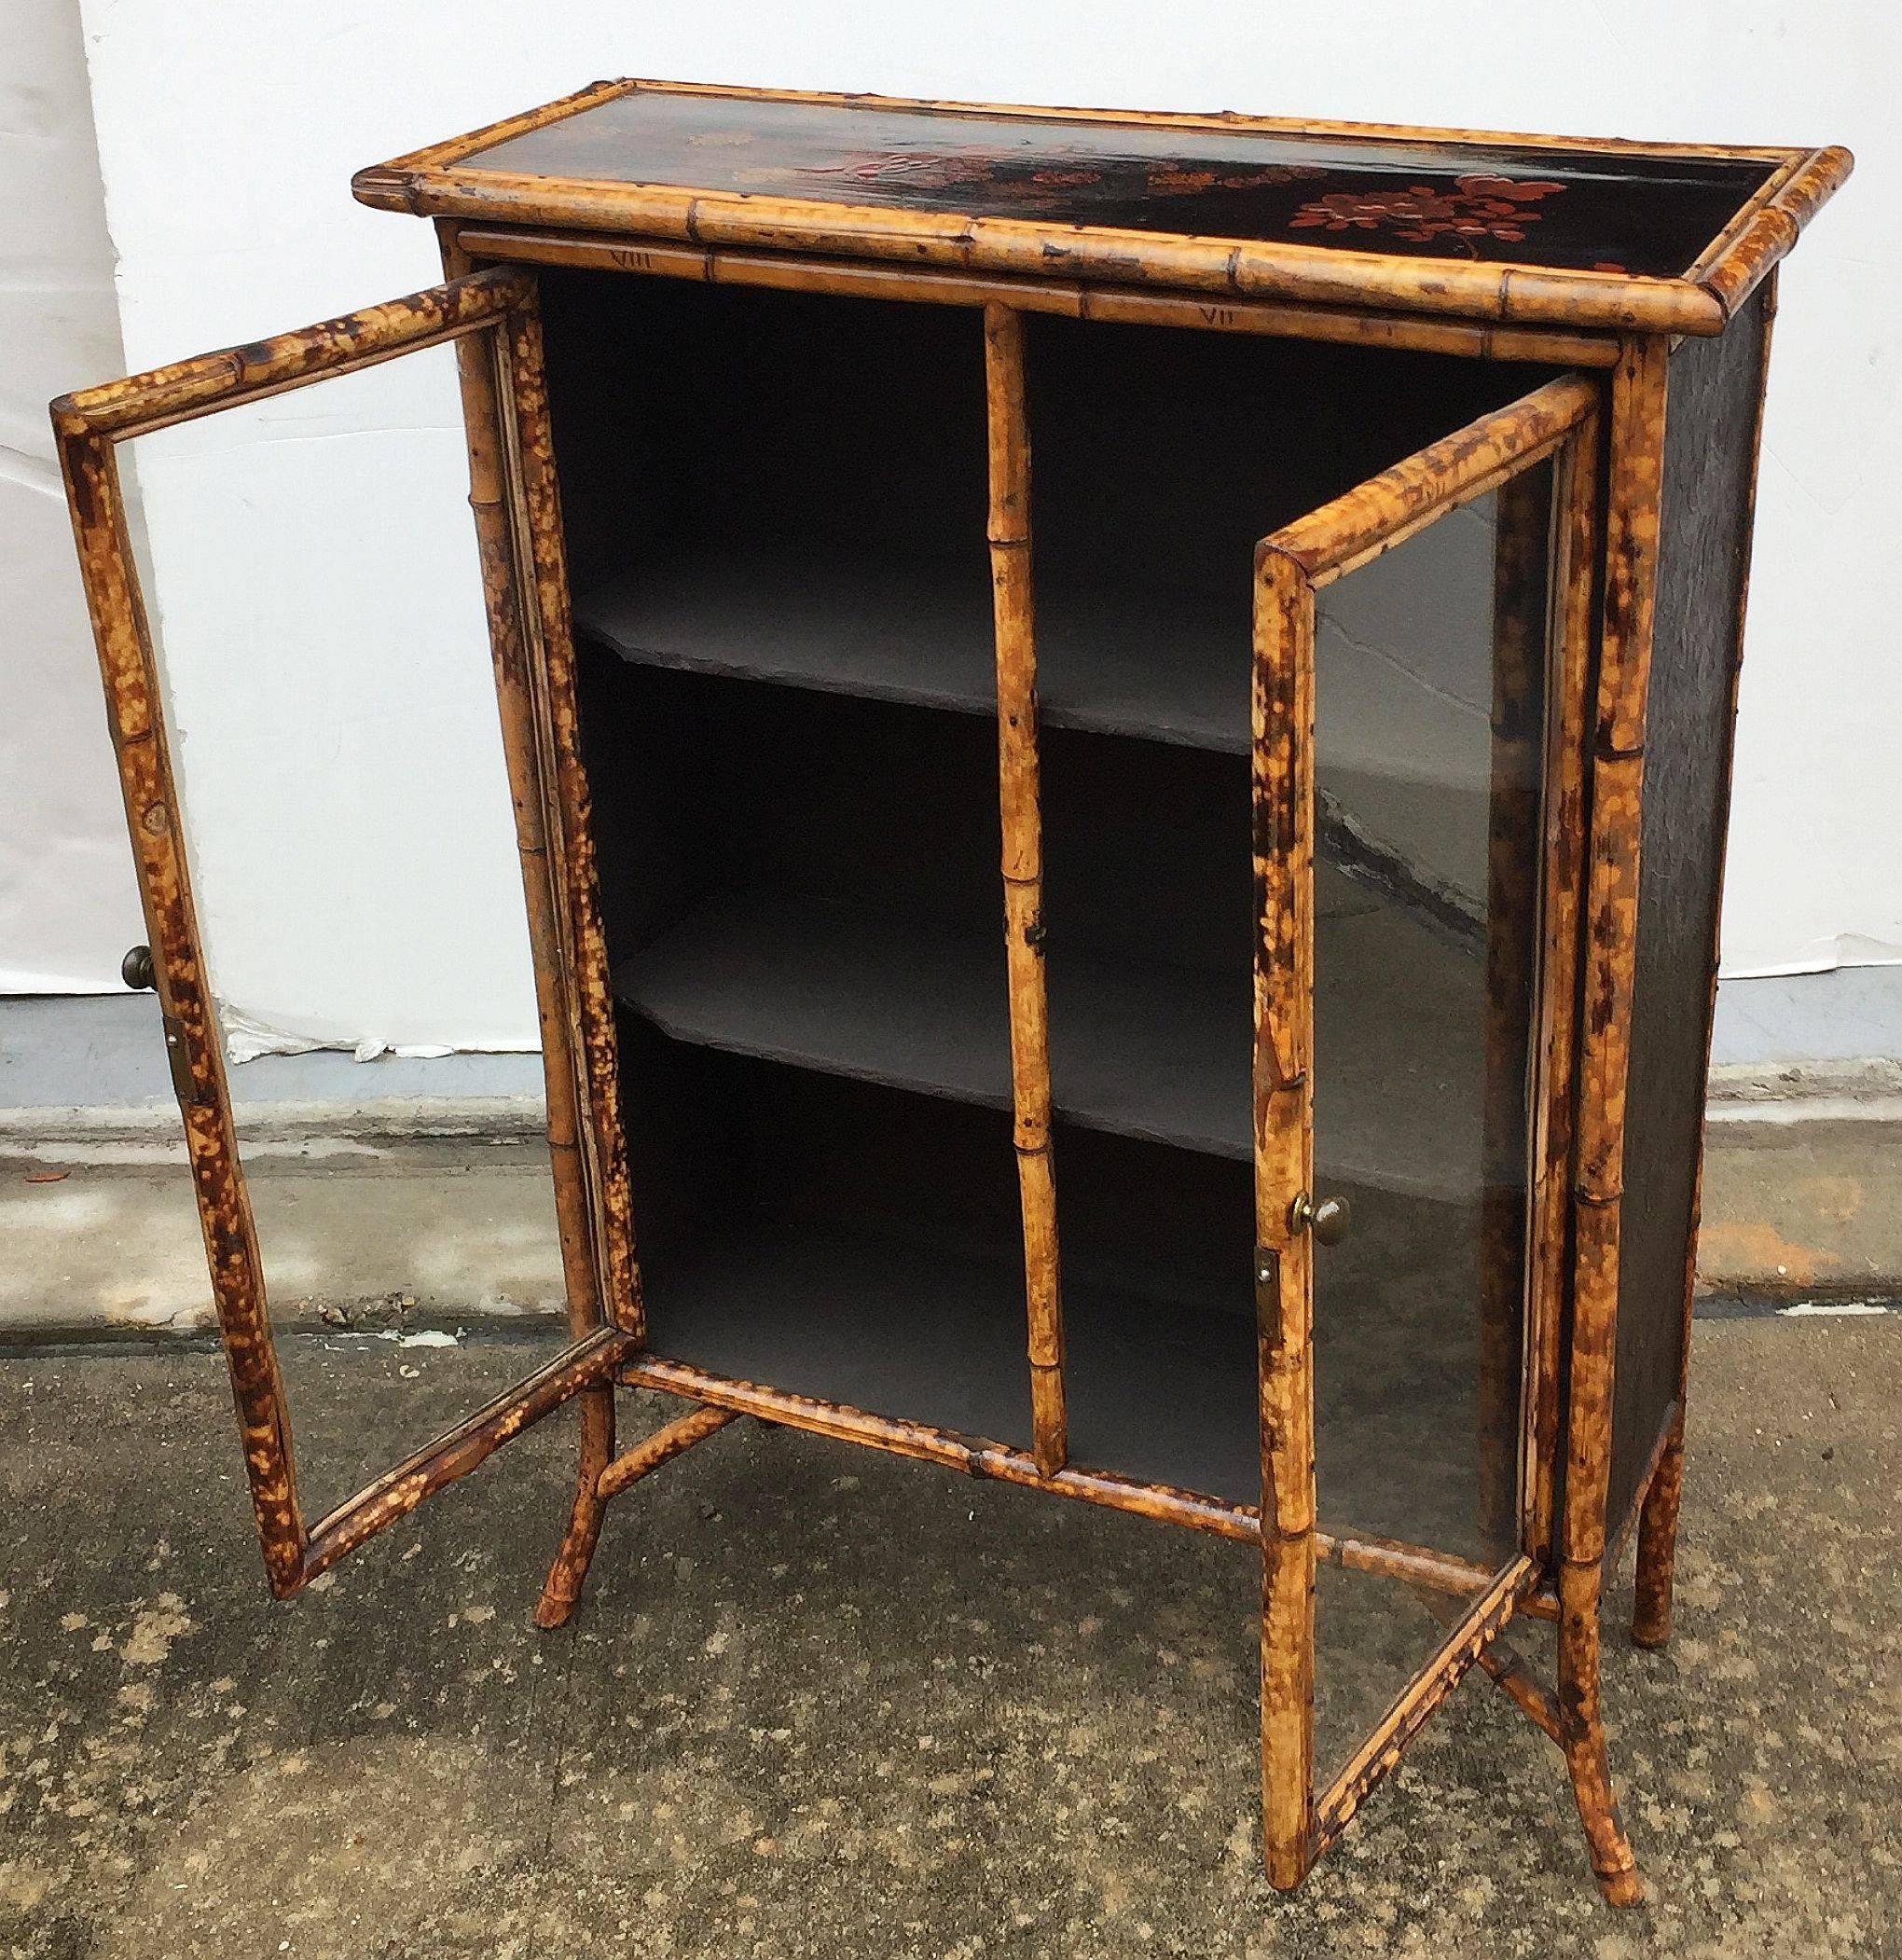 19th Century English Bamboo and Lacquer Cabinet Bookcase with Two Glass Doors